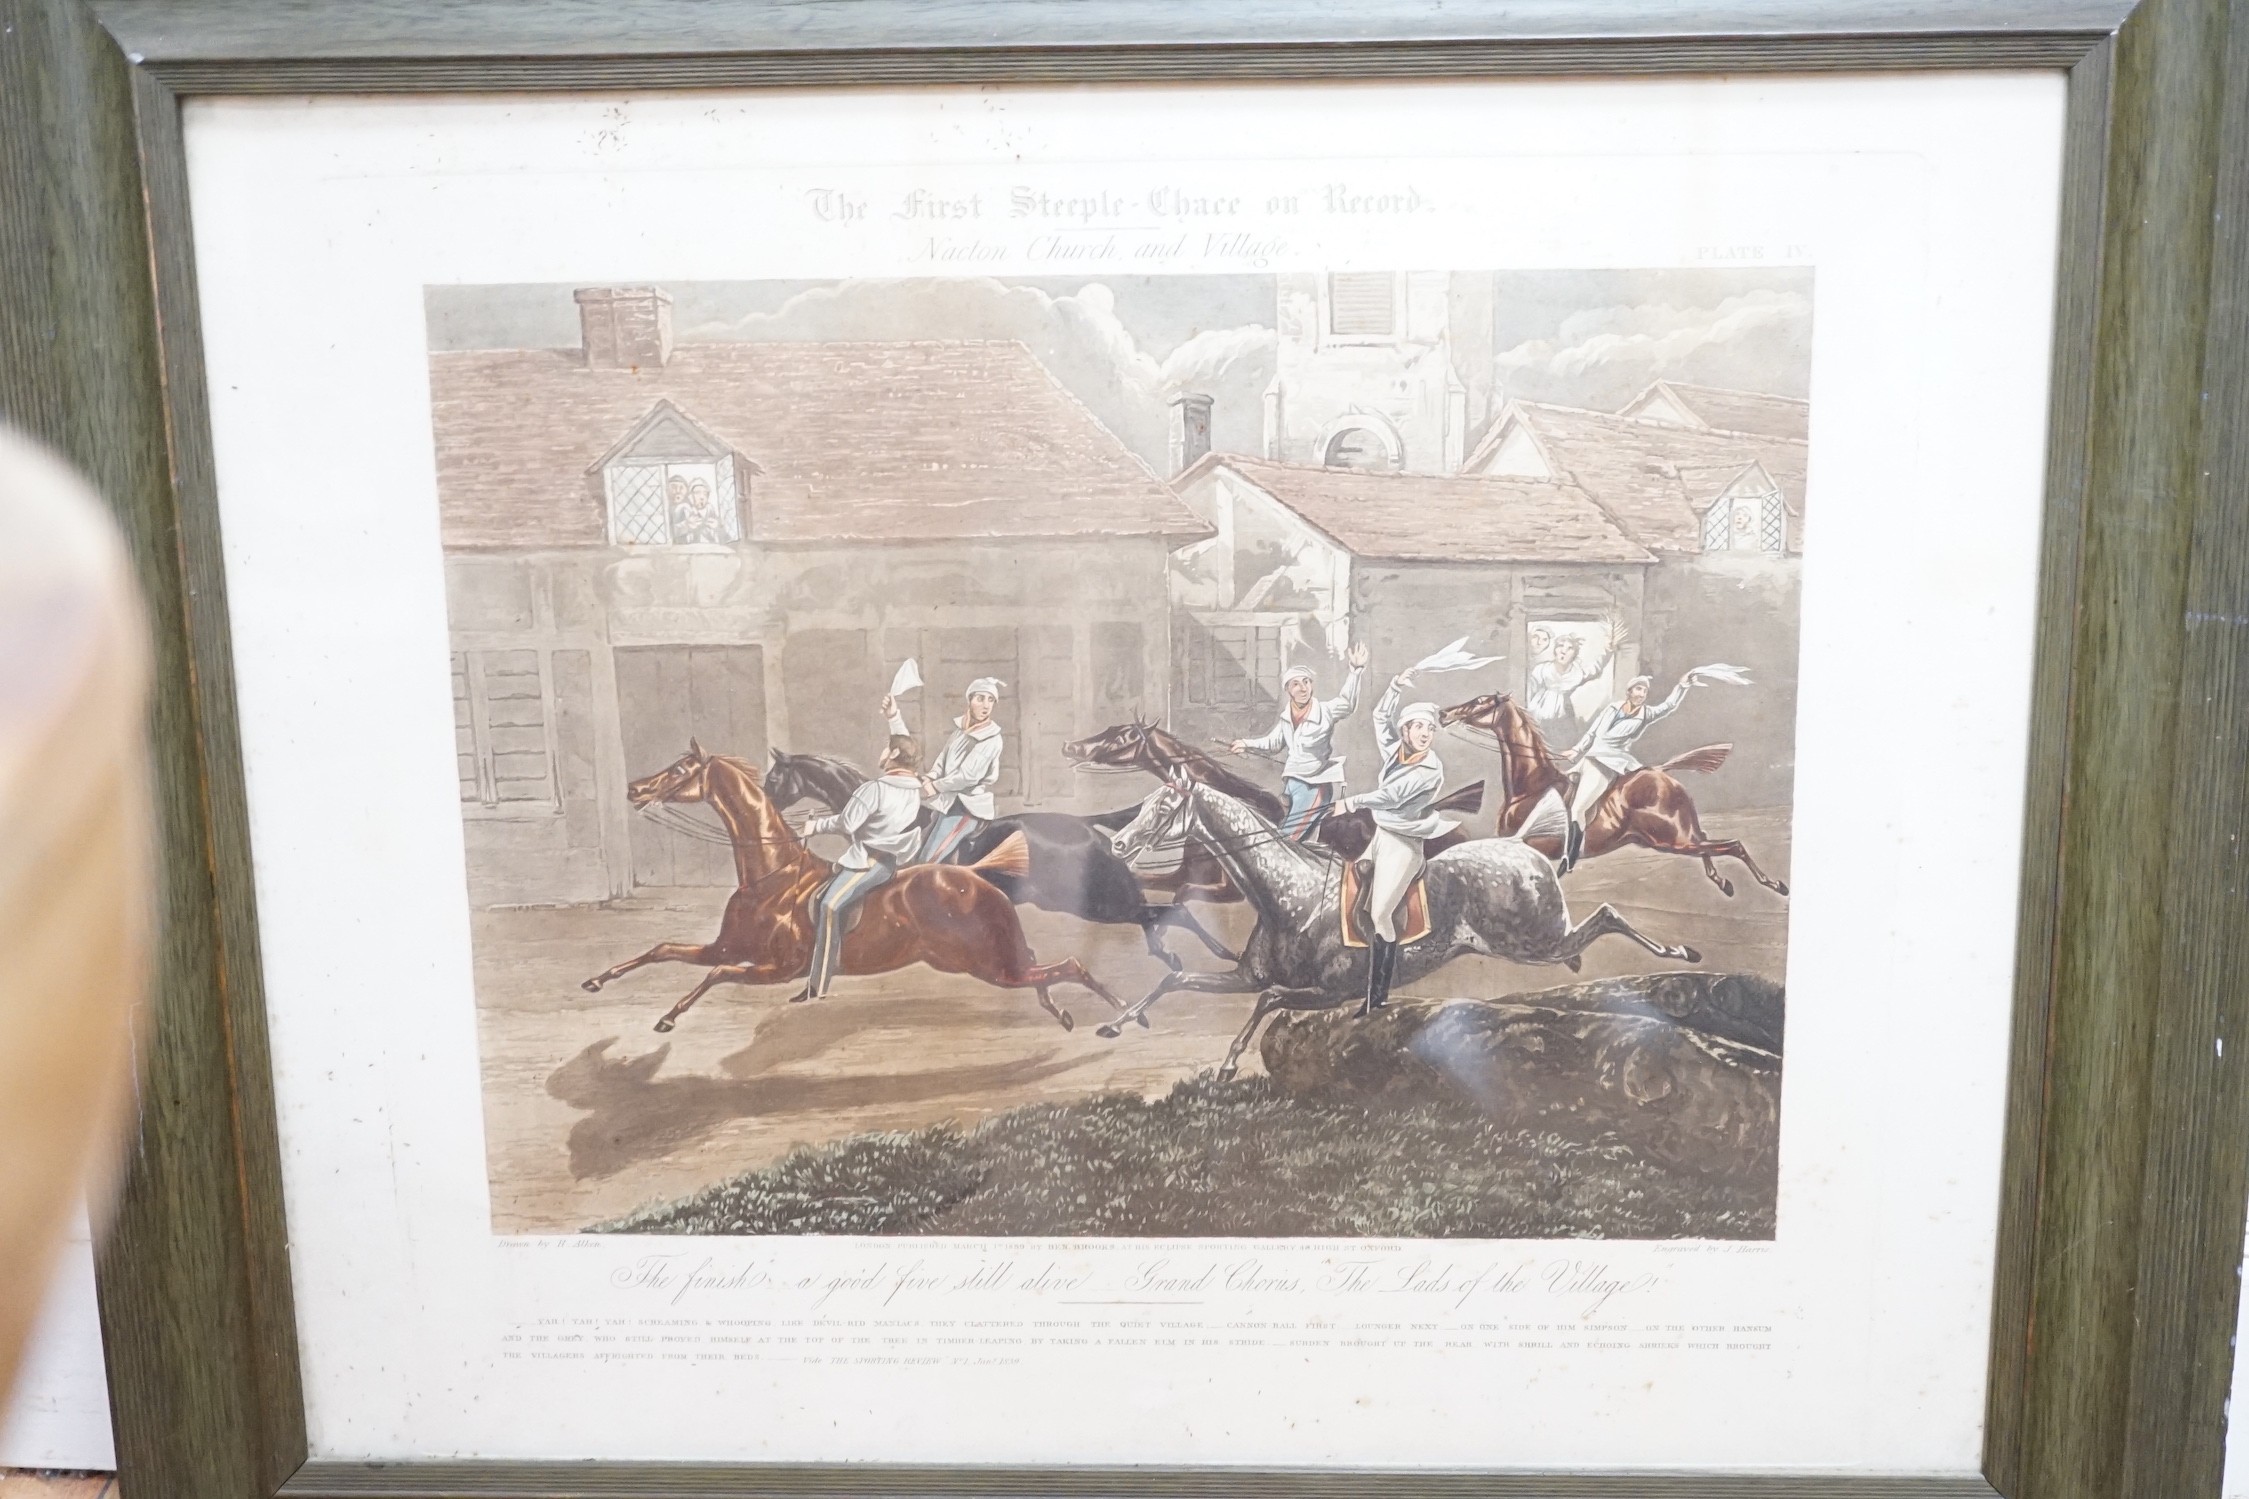 Harris after Alken, set of four coloured aquatints, 'The First Steeplechase on Record', overall 39 x - Image 3 of 4